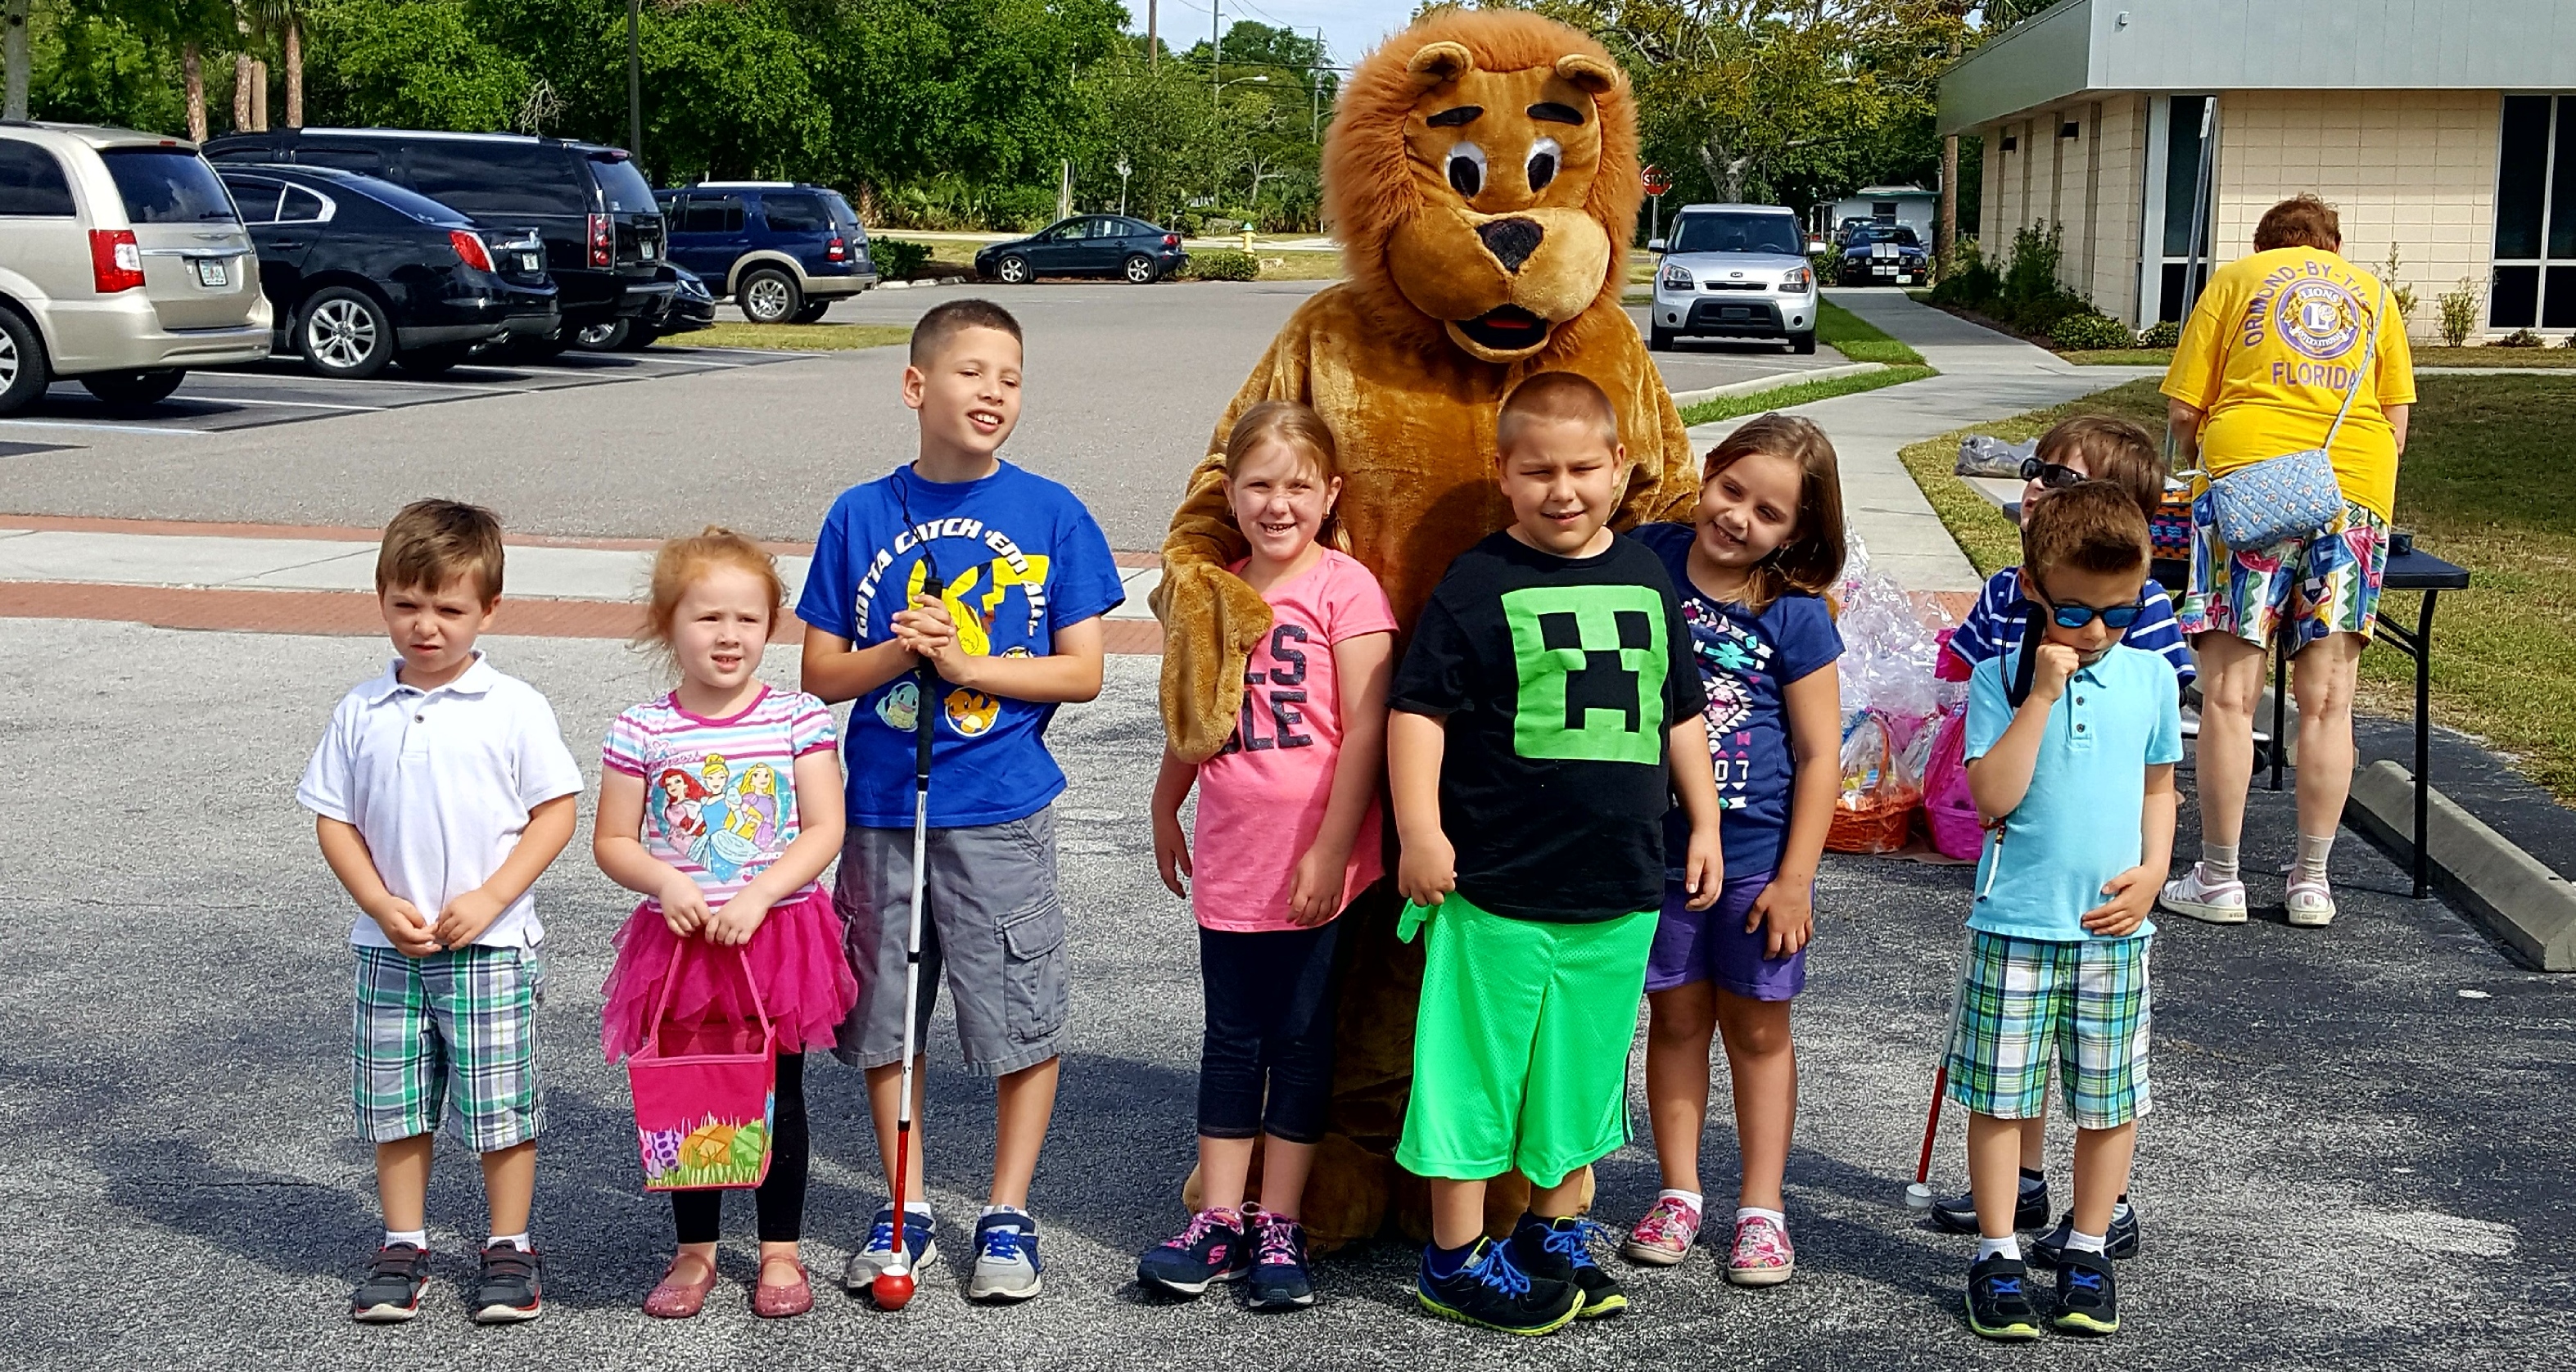 Eight kids under the age of ten  smiling with someone in a lion costume